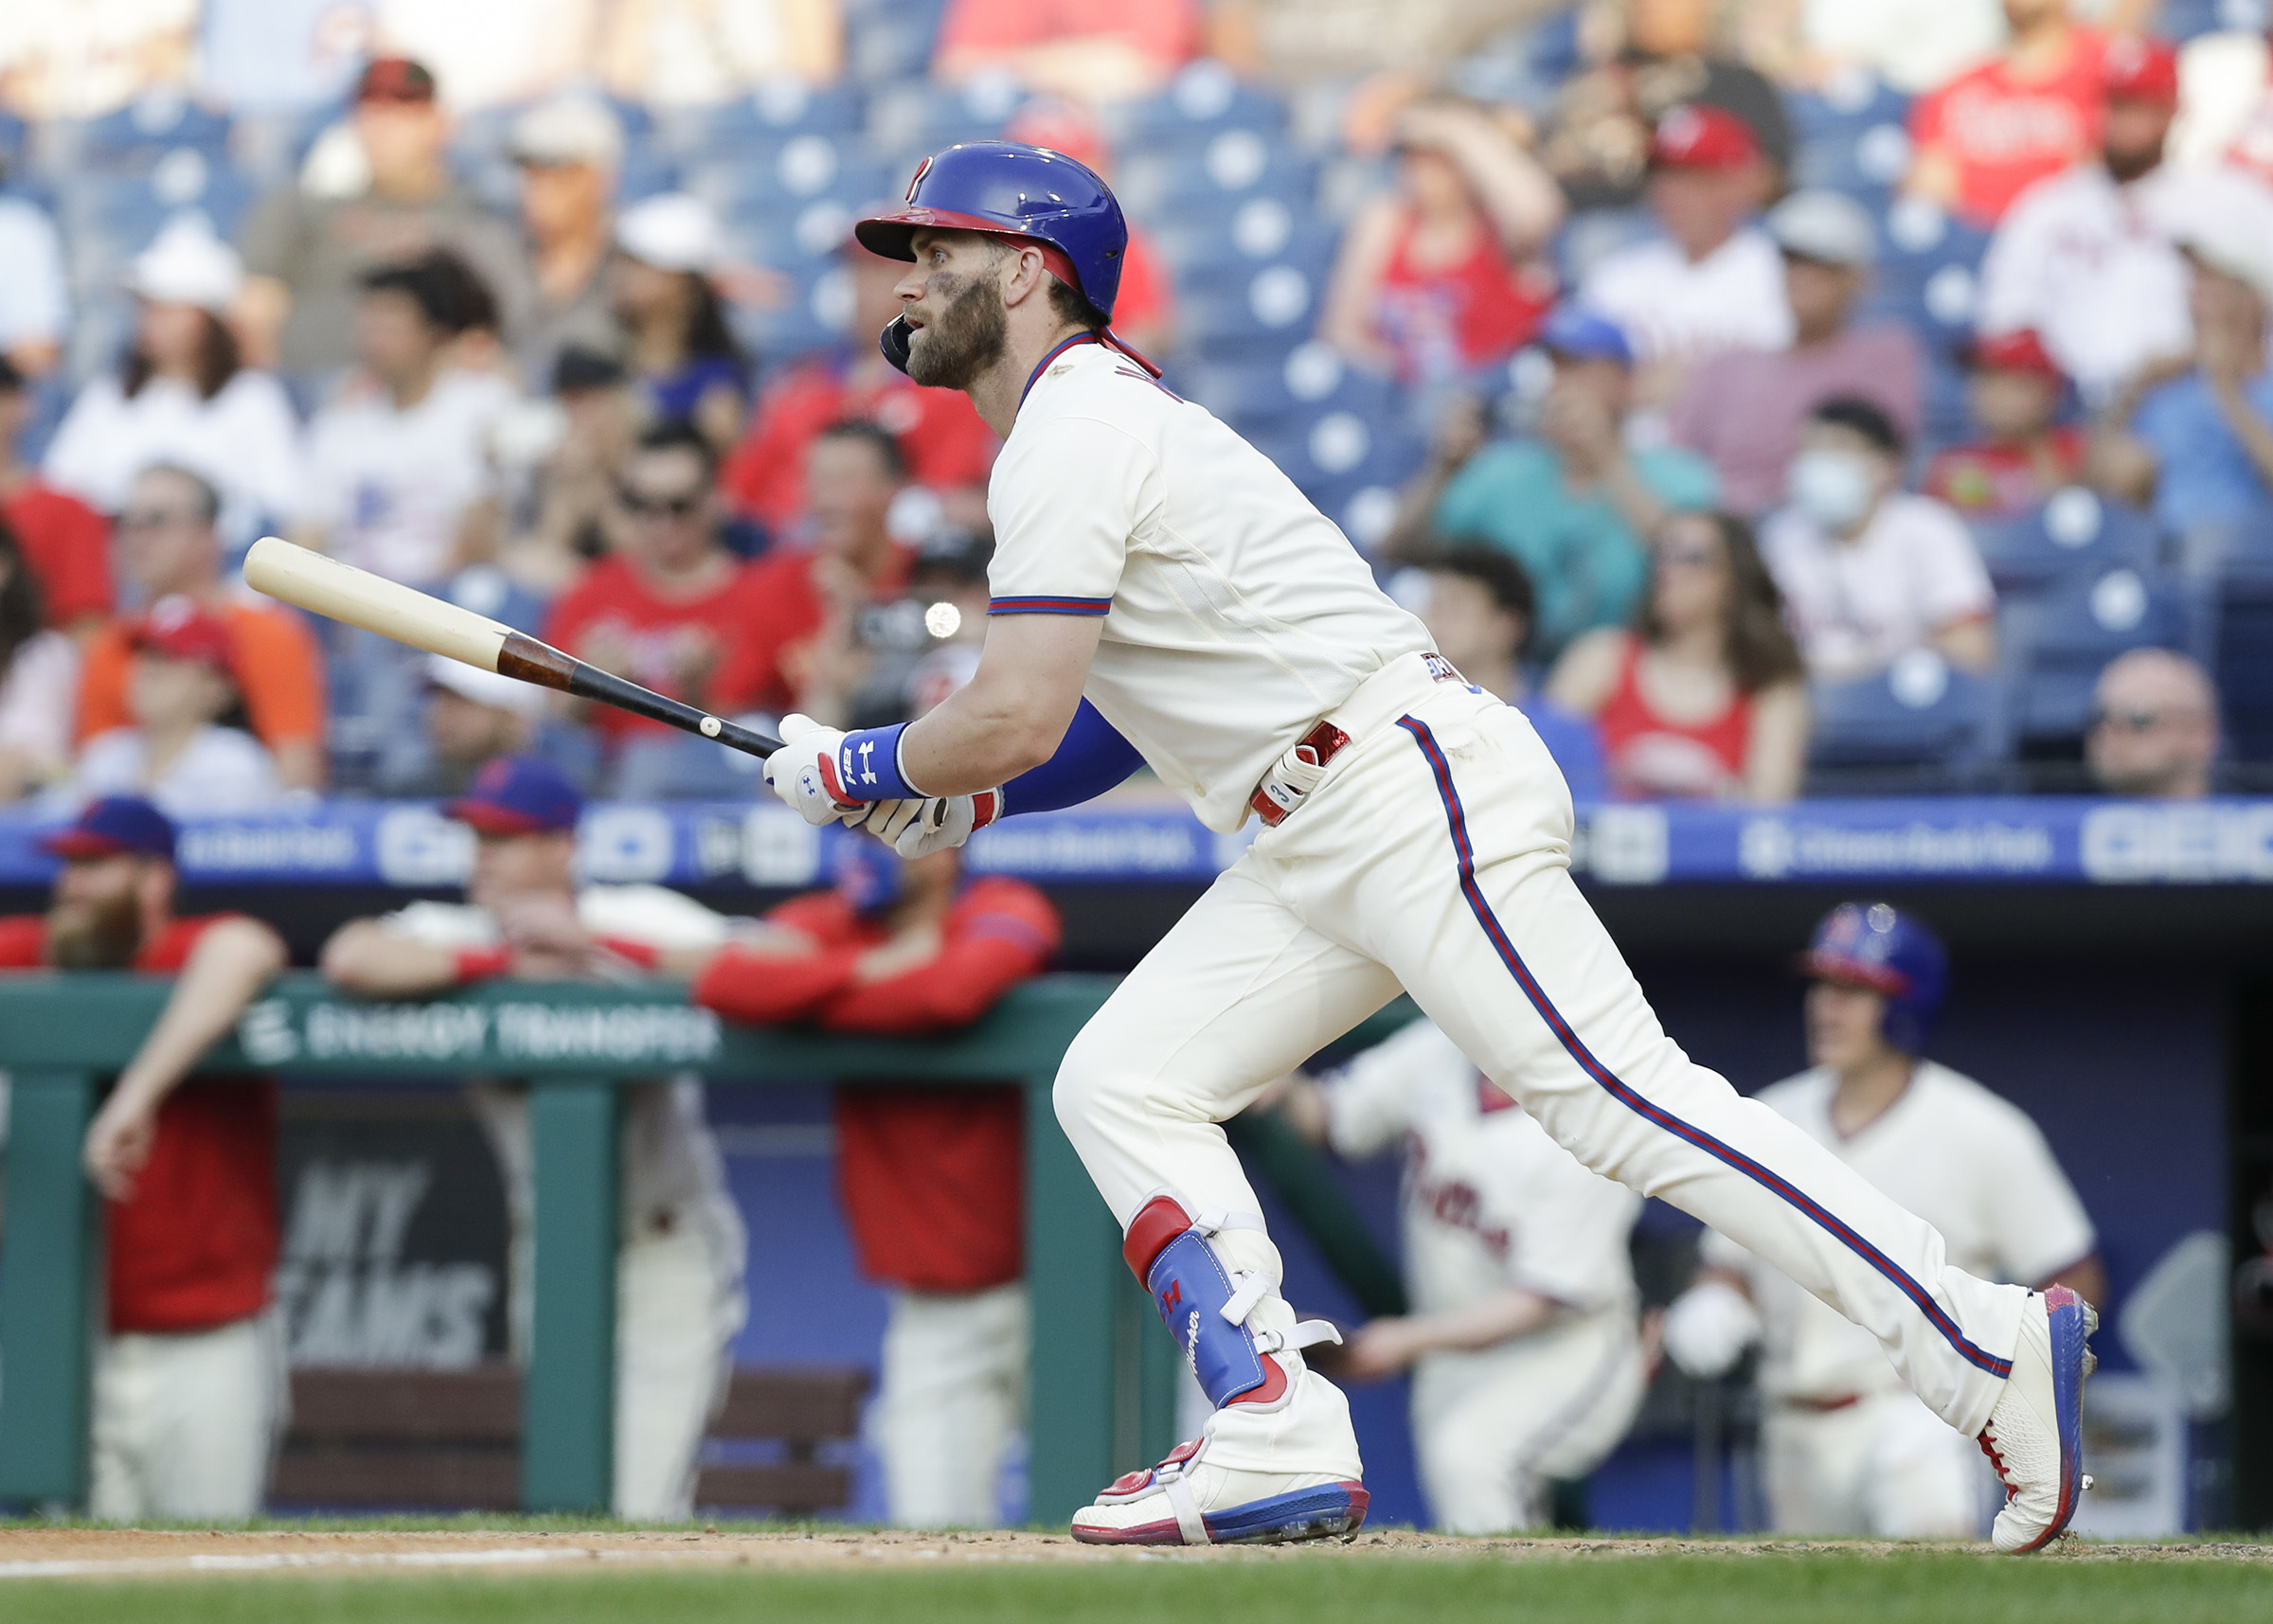 If Phillies don't re-sign J.T. Realmuto, will they alienate Bryce Harper?